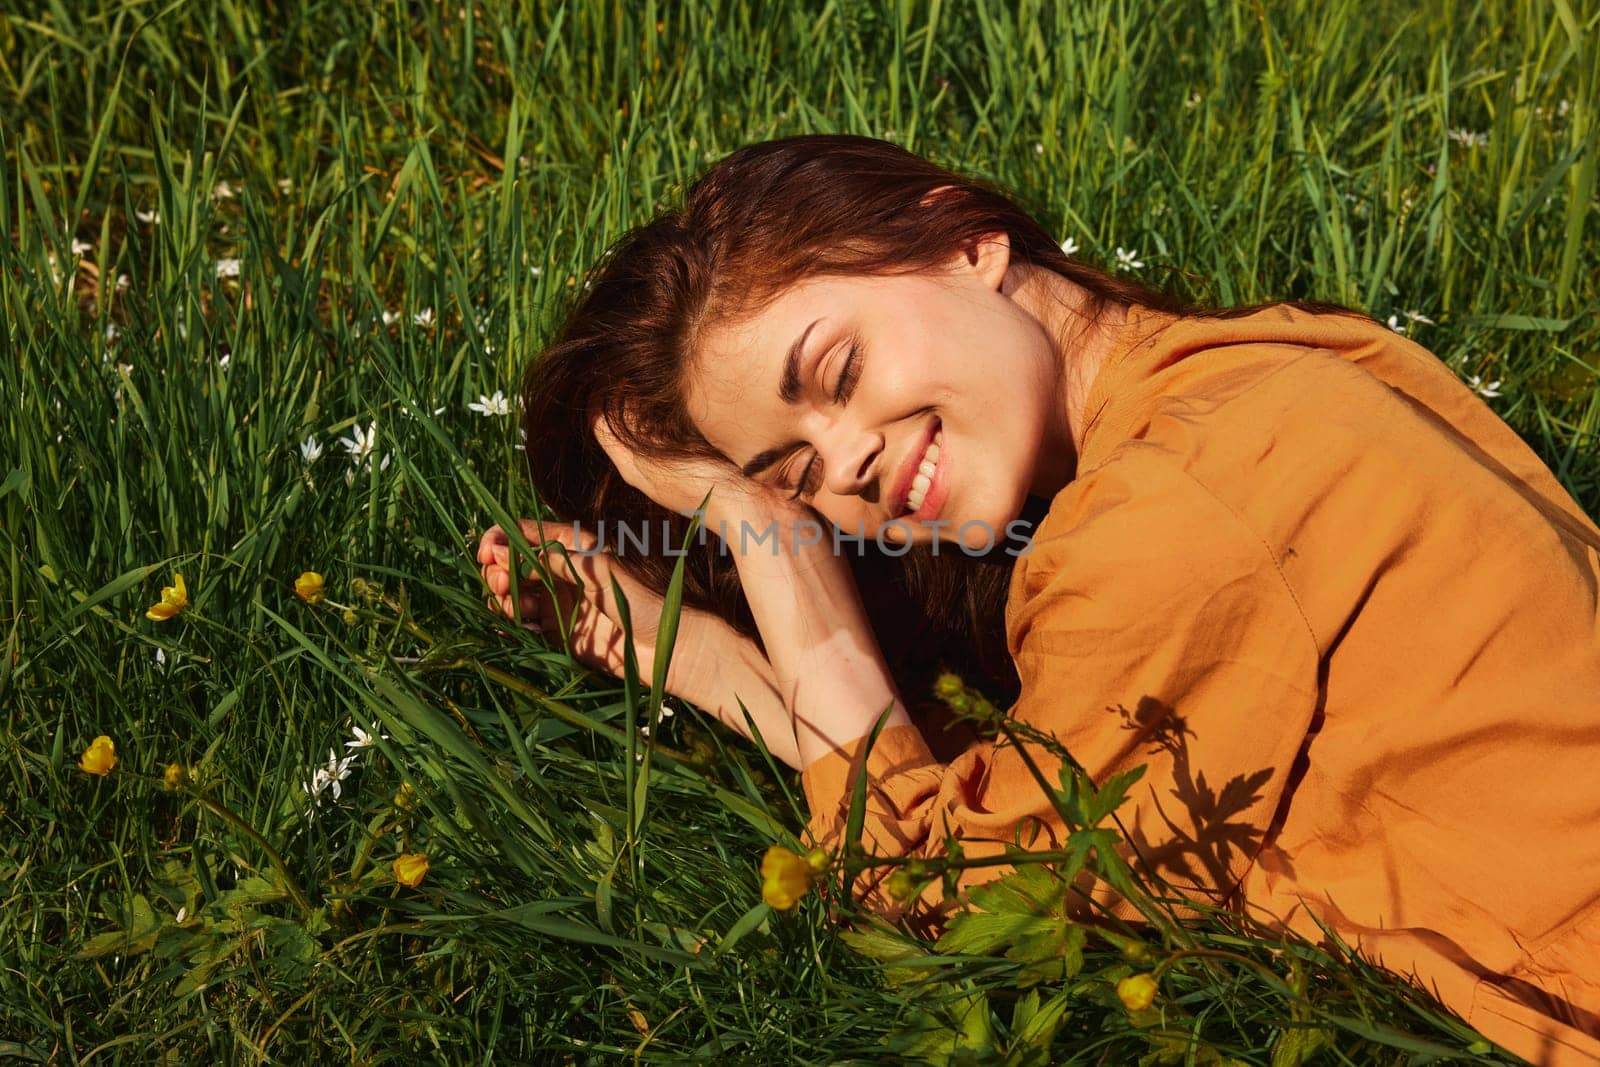 a calm woman with long red hair lies in a green field with yellow flowers, in an orange dress smiling pleasantly, closing her eyes from the bright summer sun. High quality photo